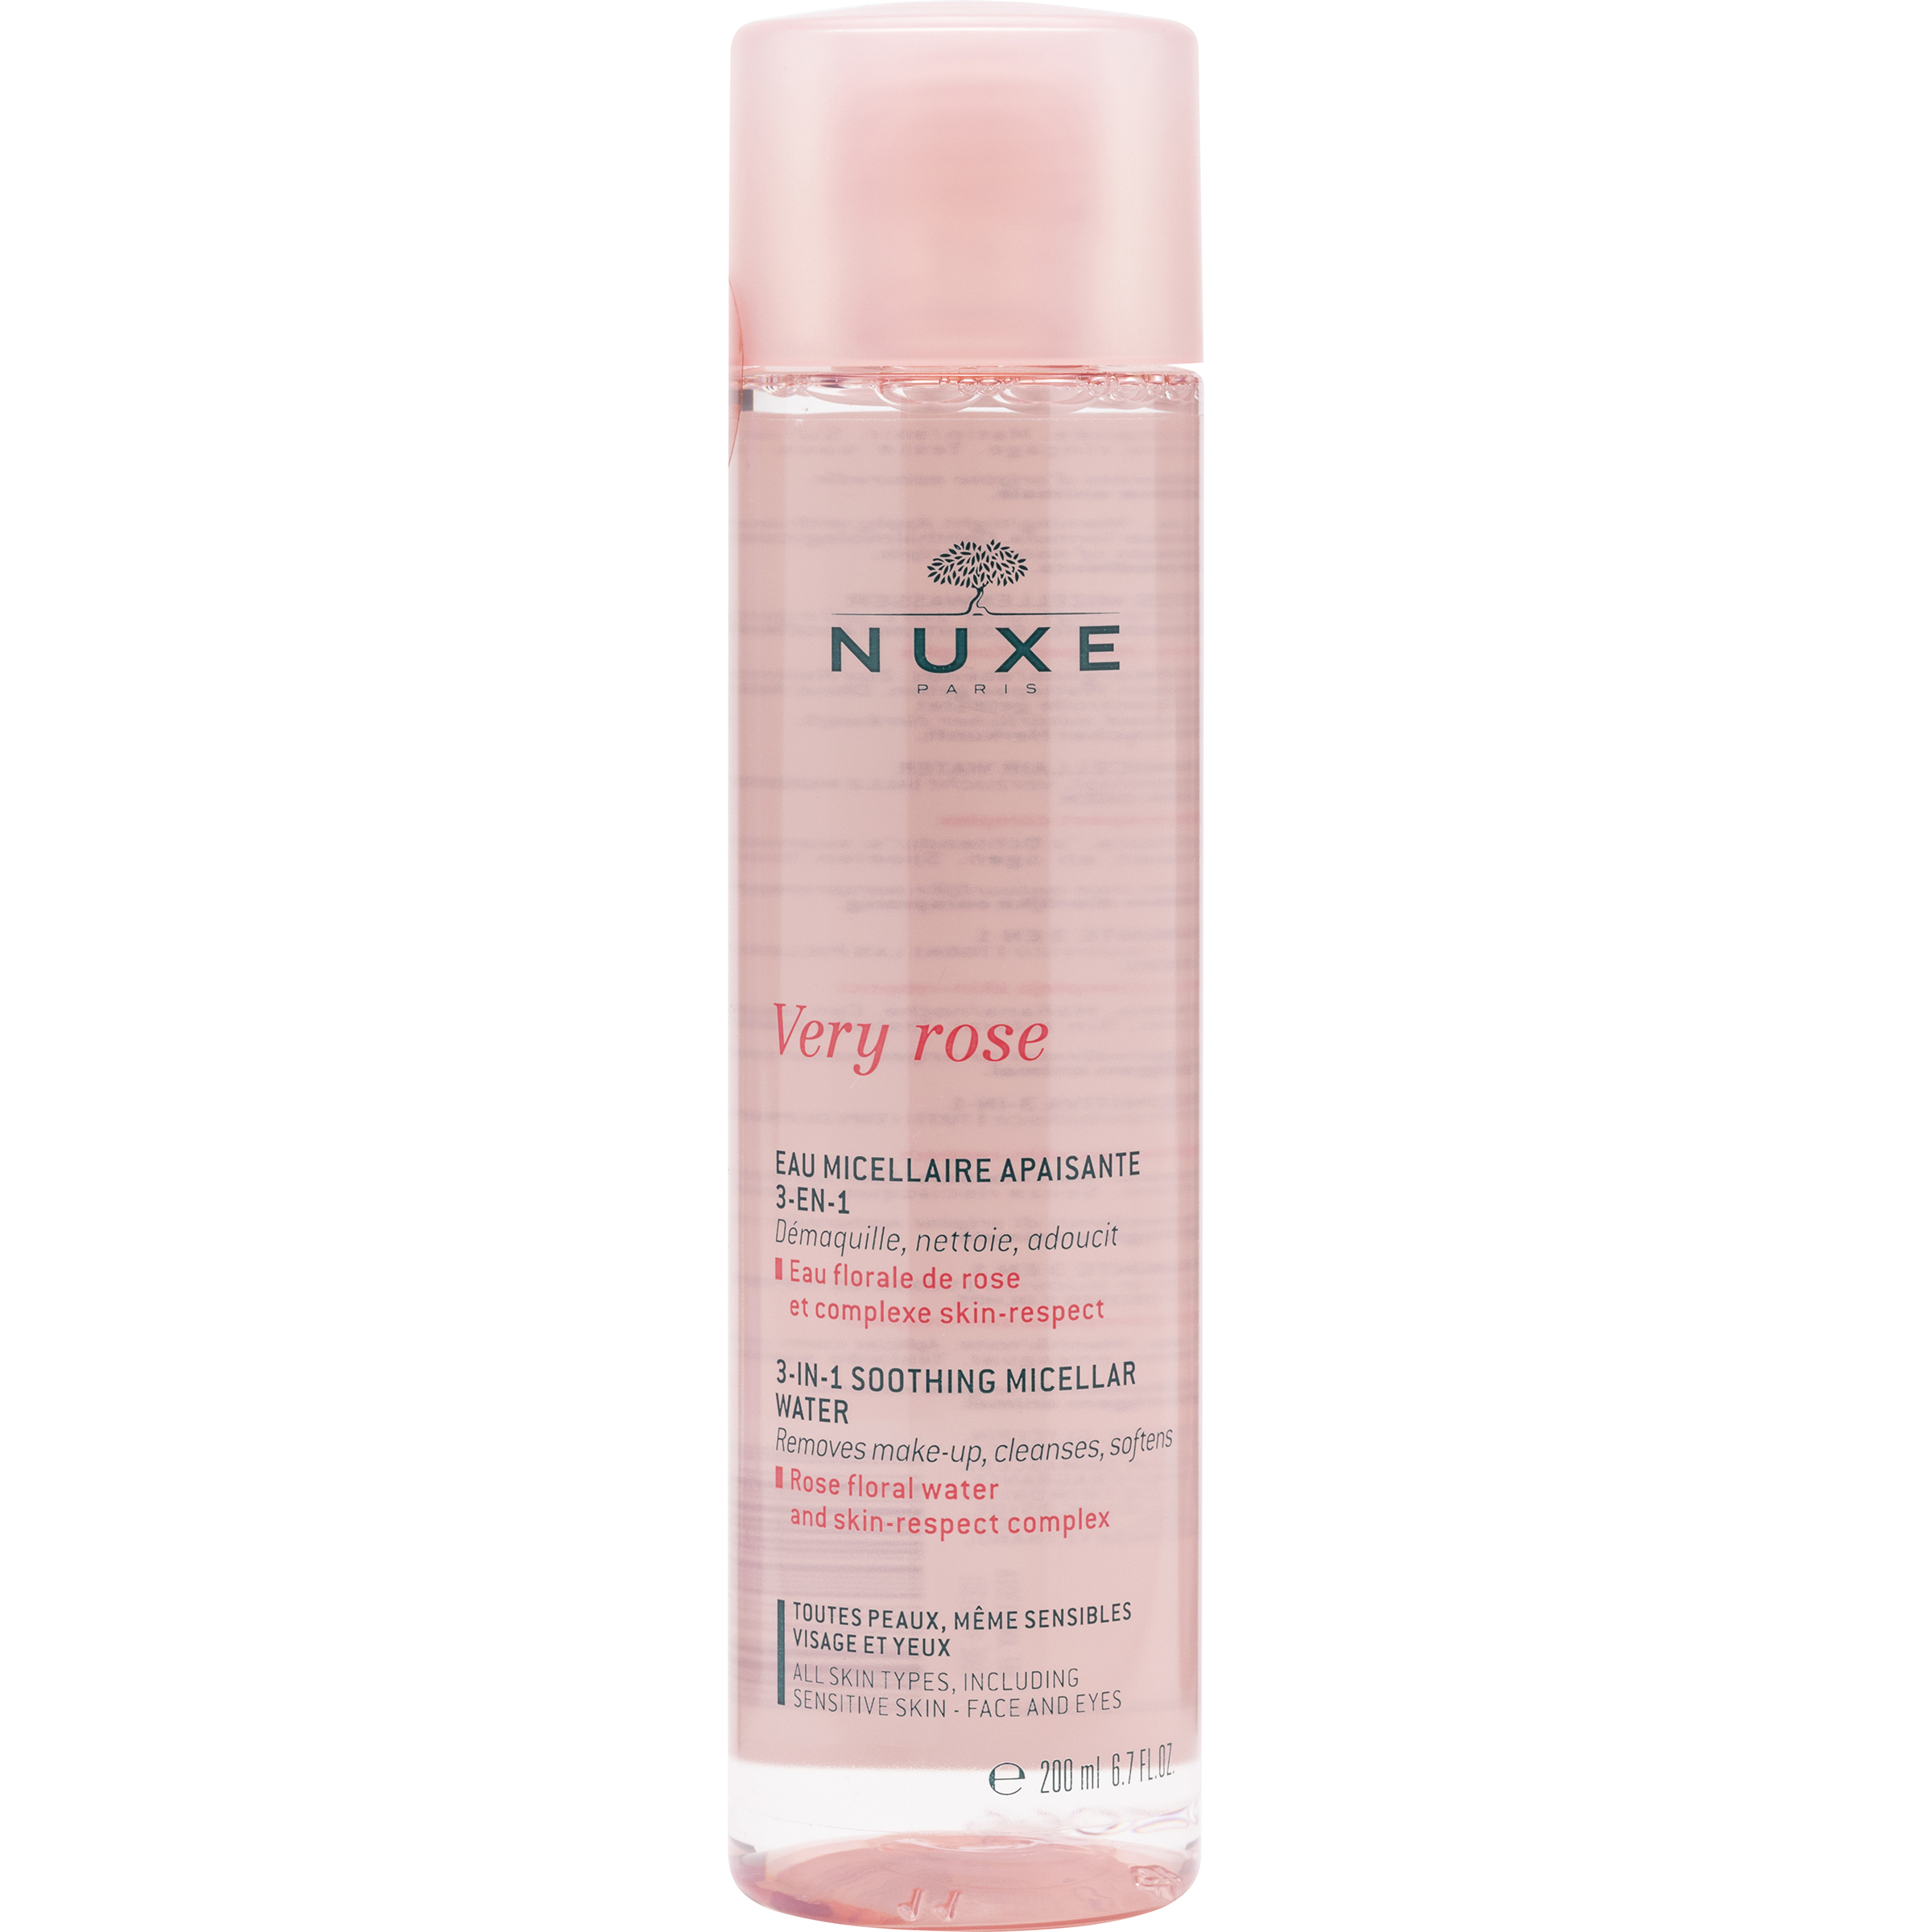 Nuxe Very rose